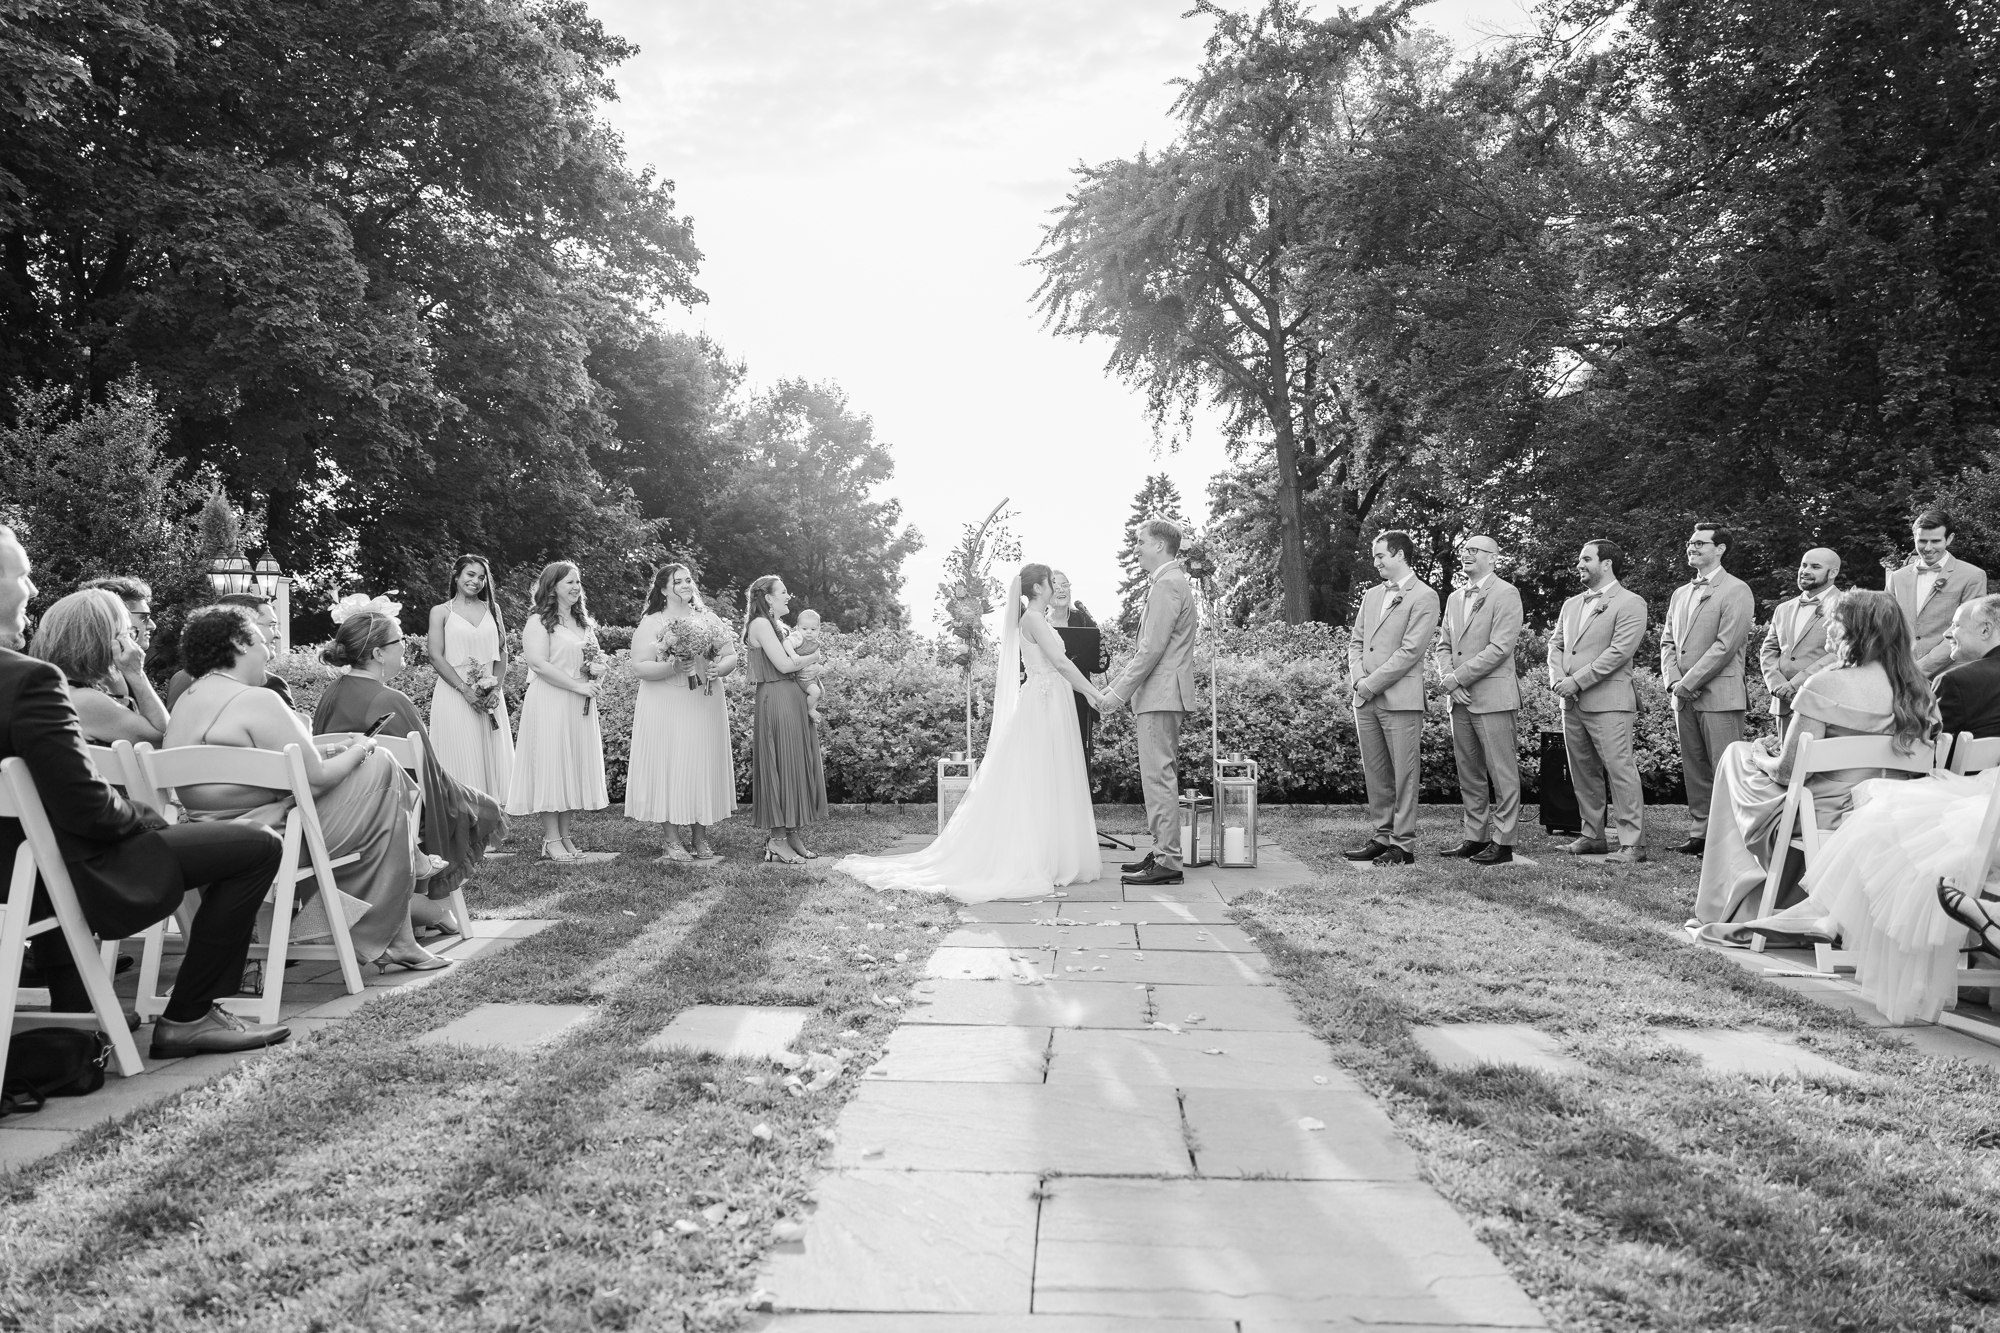 Bright Wedding at Briarcliff Manor in Summertime